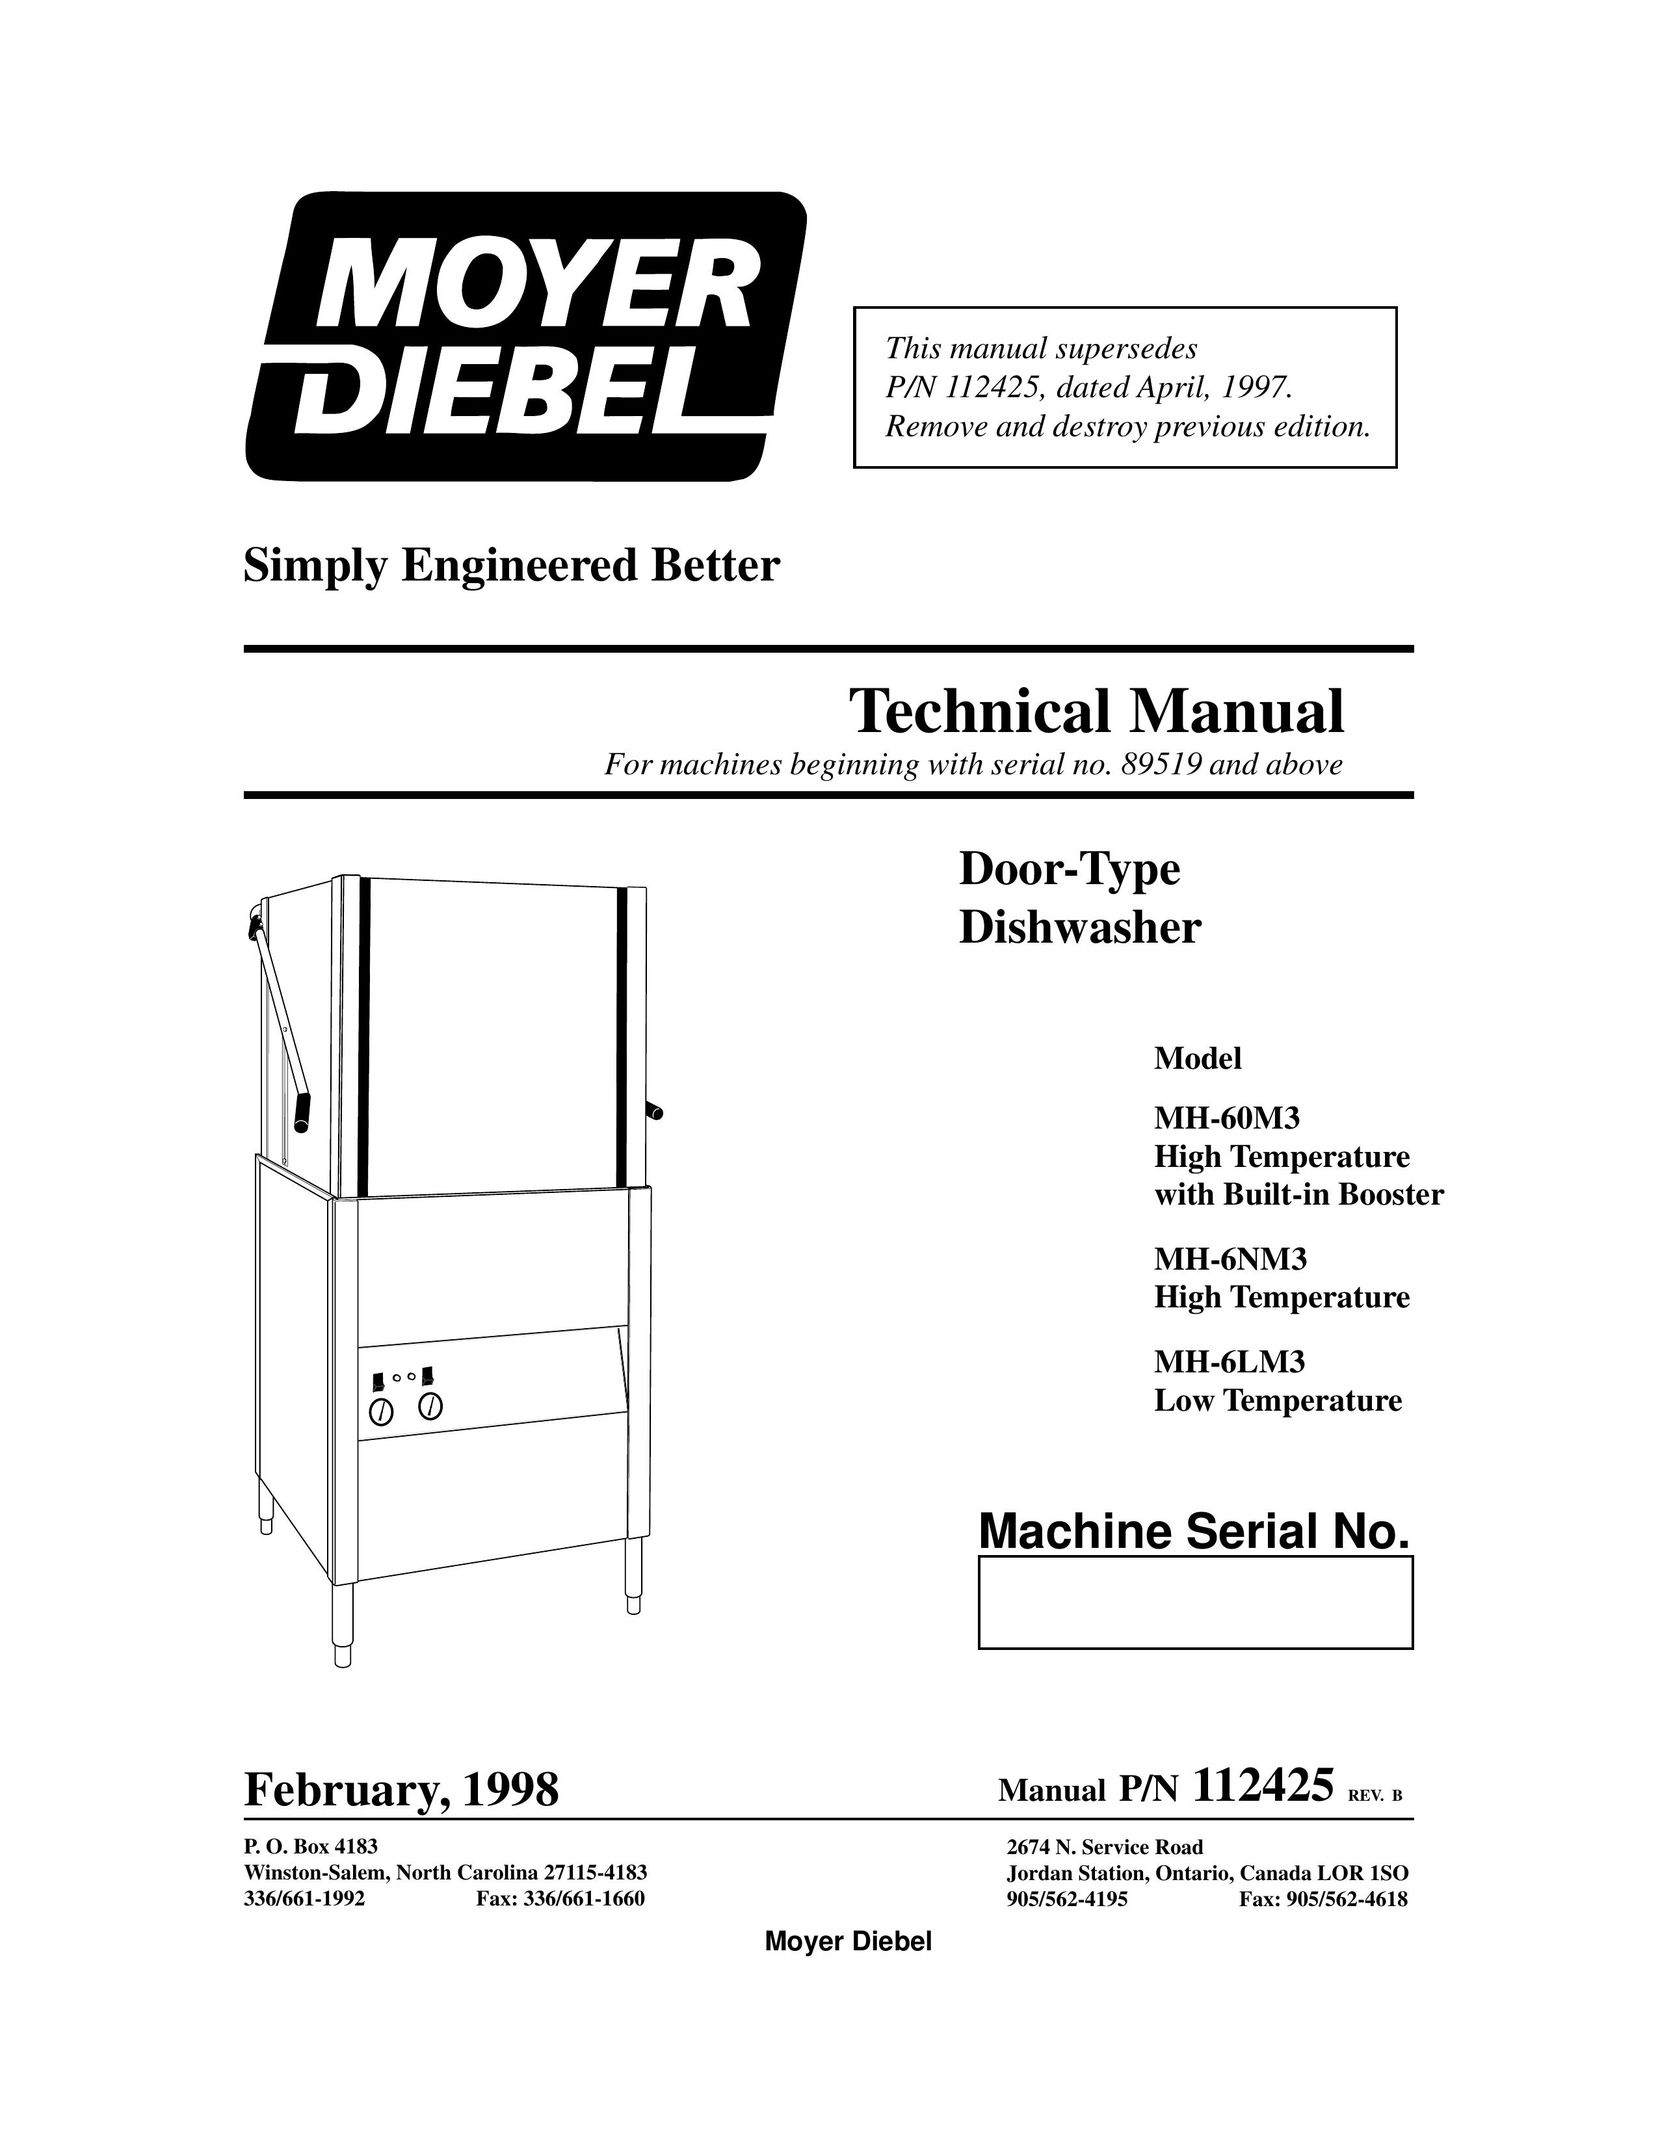 Moyer Diebel MH-6LM3 Dishwasher User Manual